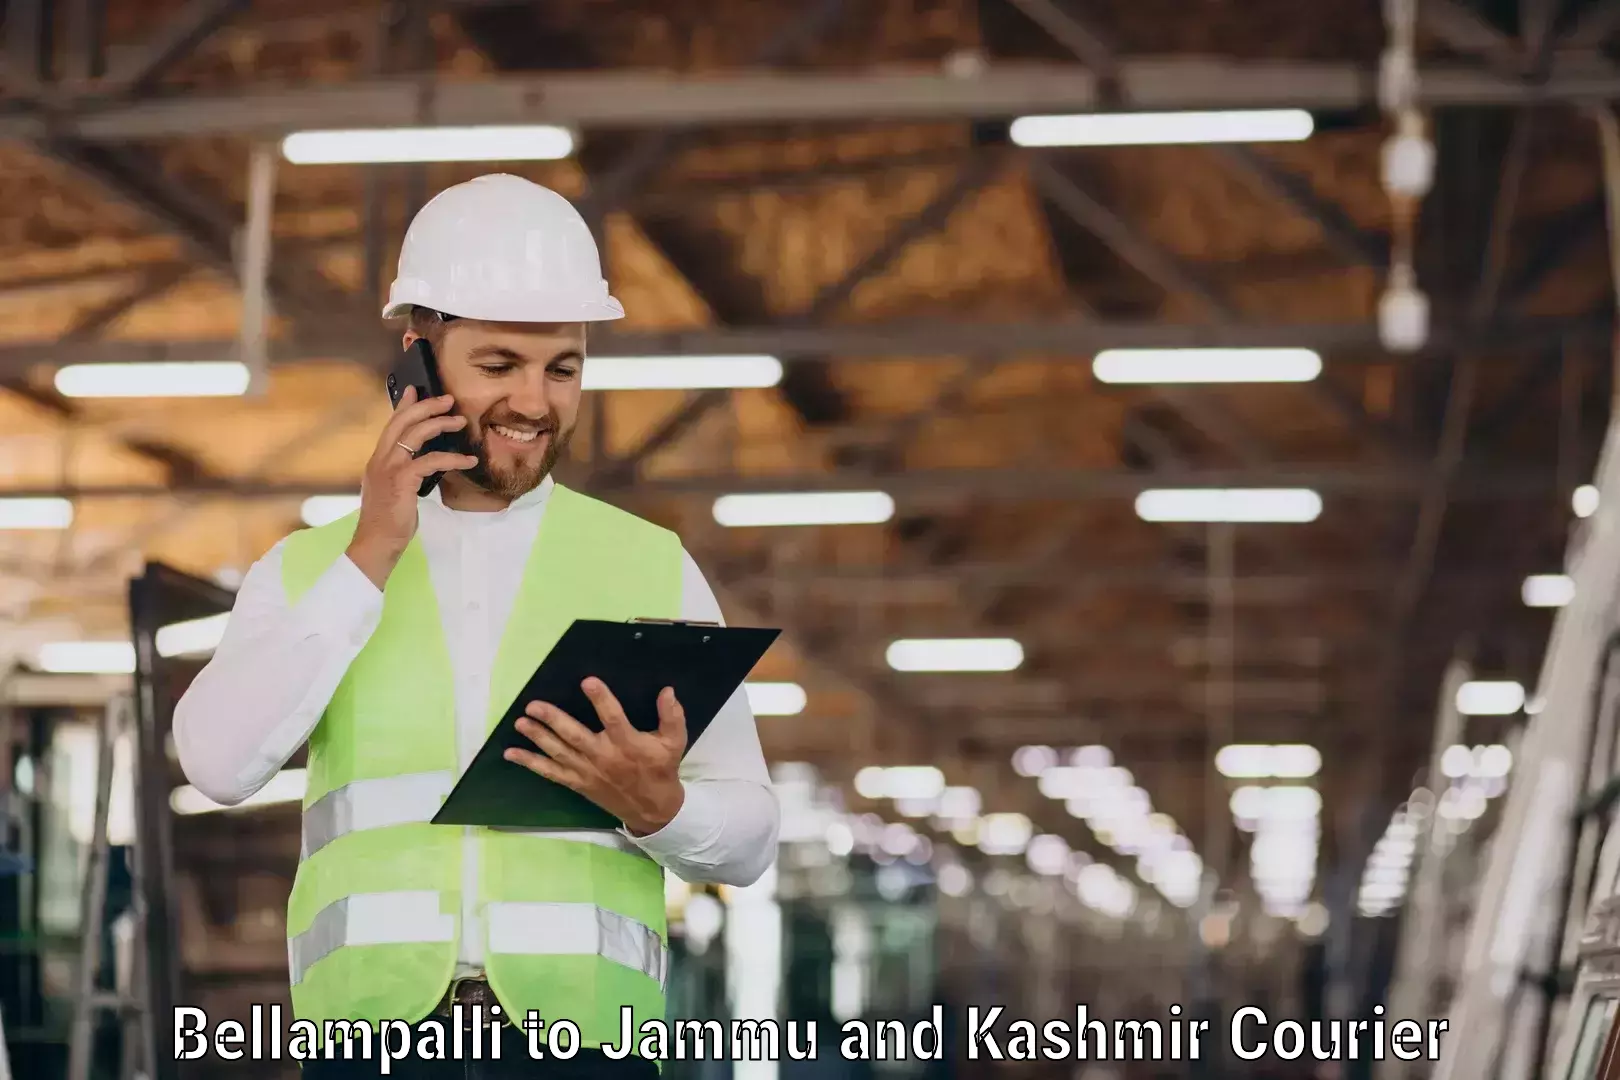 On-call courier service in Bellampalli to Anantnag